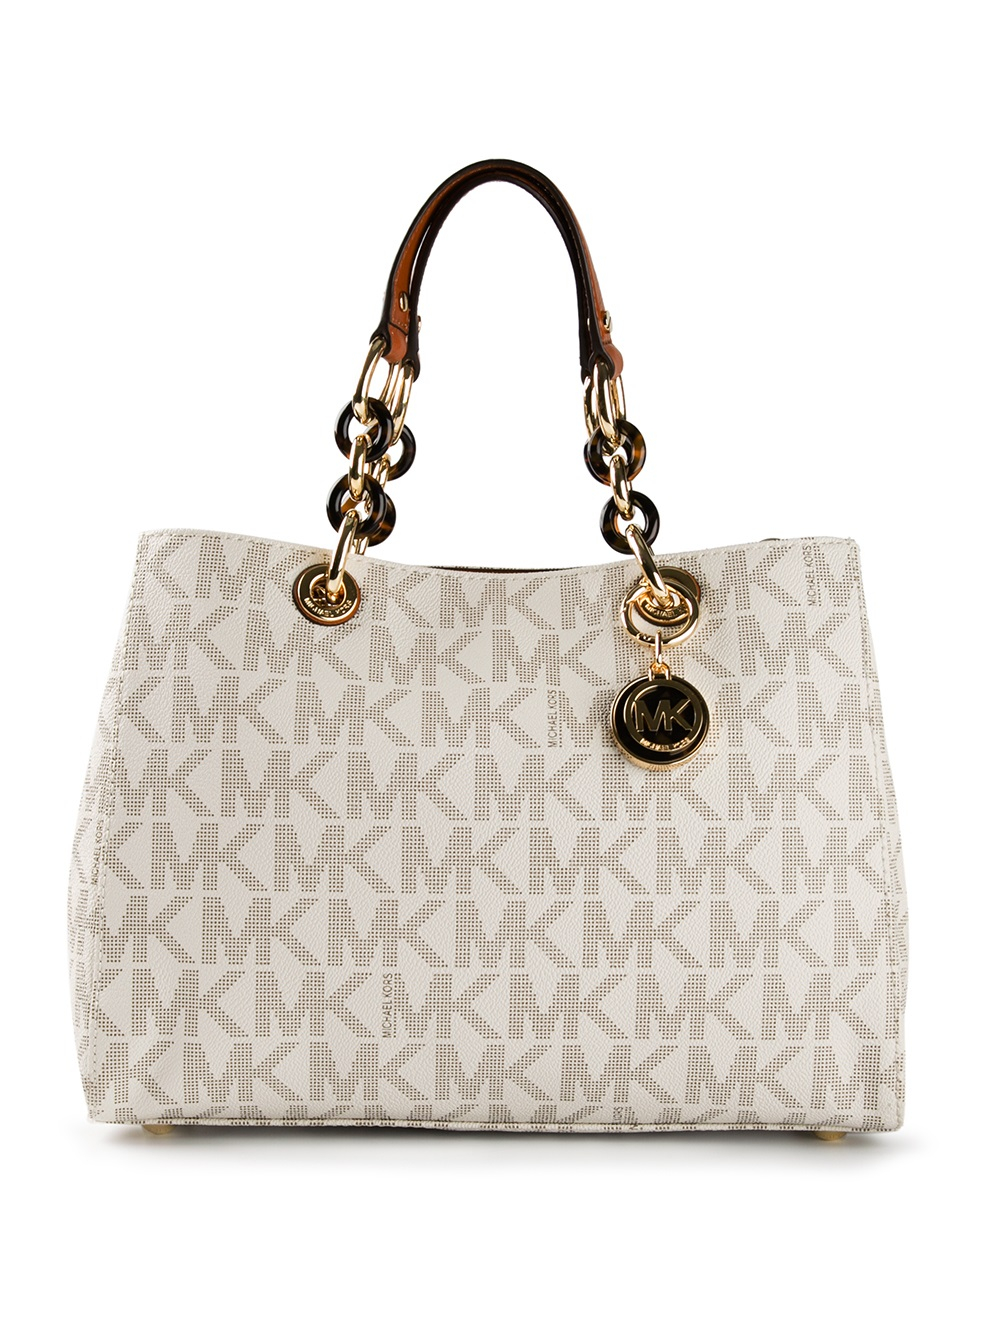 MICHAEL Michael Kors Chain Strap Tote in White | Lyst